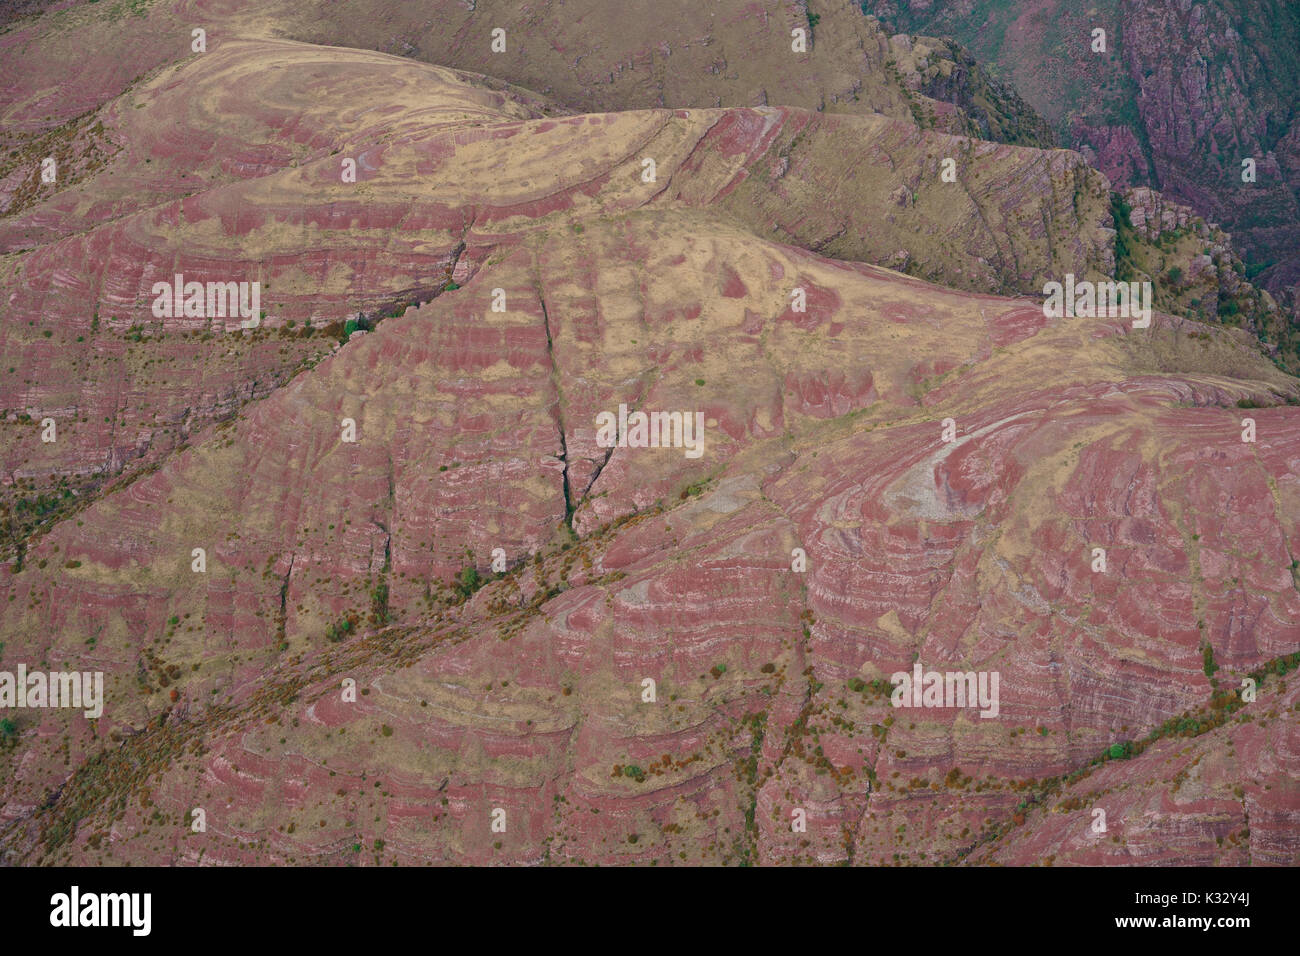 AERIAL VIEW. Stripes of reddish-brown pelite rocks and dry grass above the Cians Gorge. Pierlas, Alpes-Maritimes, France. Stock Photo